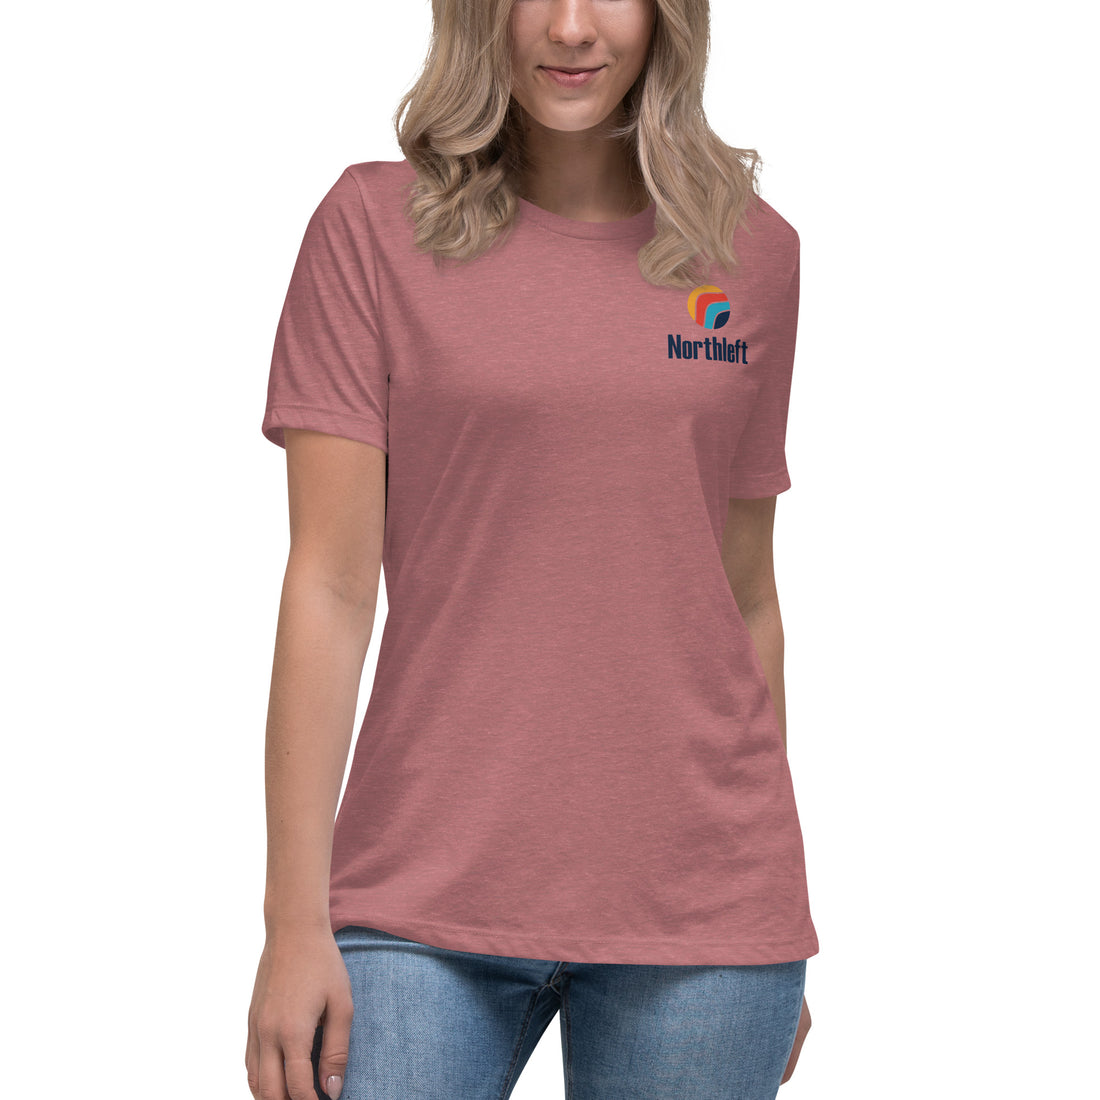 Women's Northleft Relaxed Fit T-Shirt